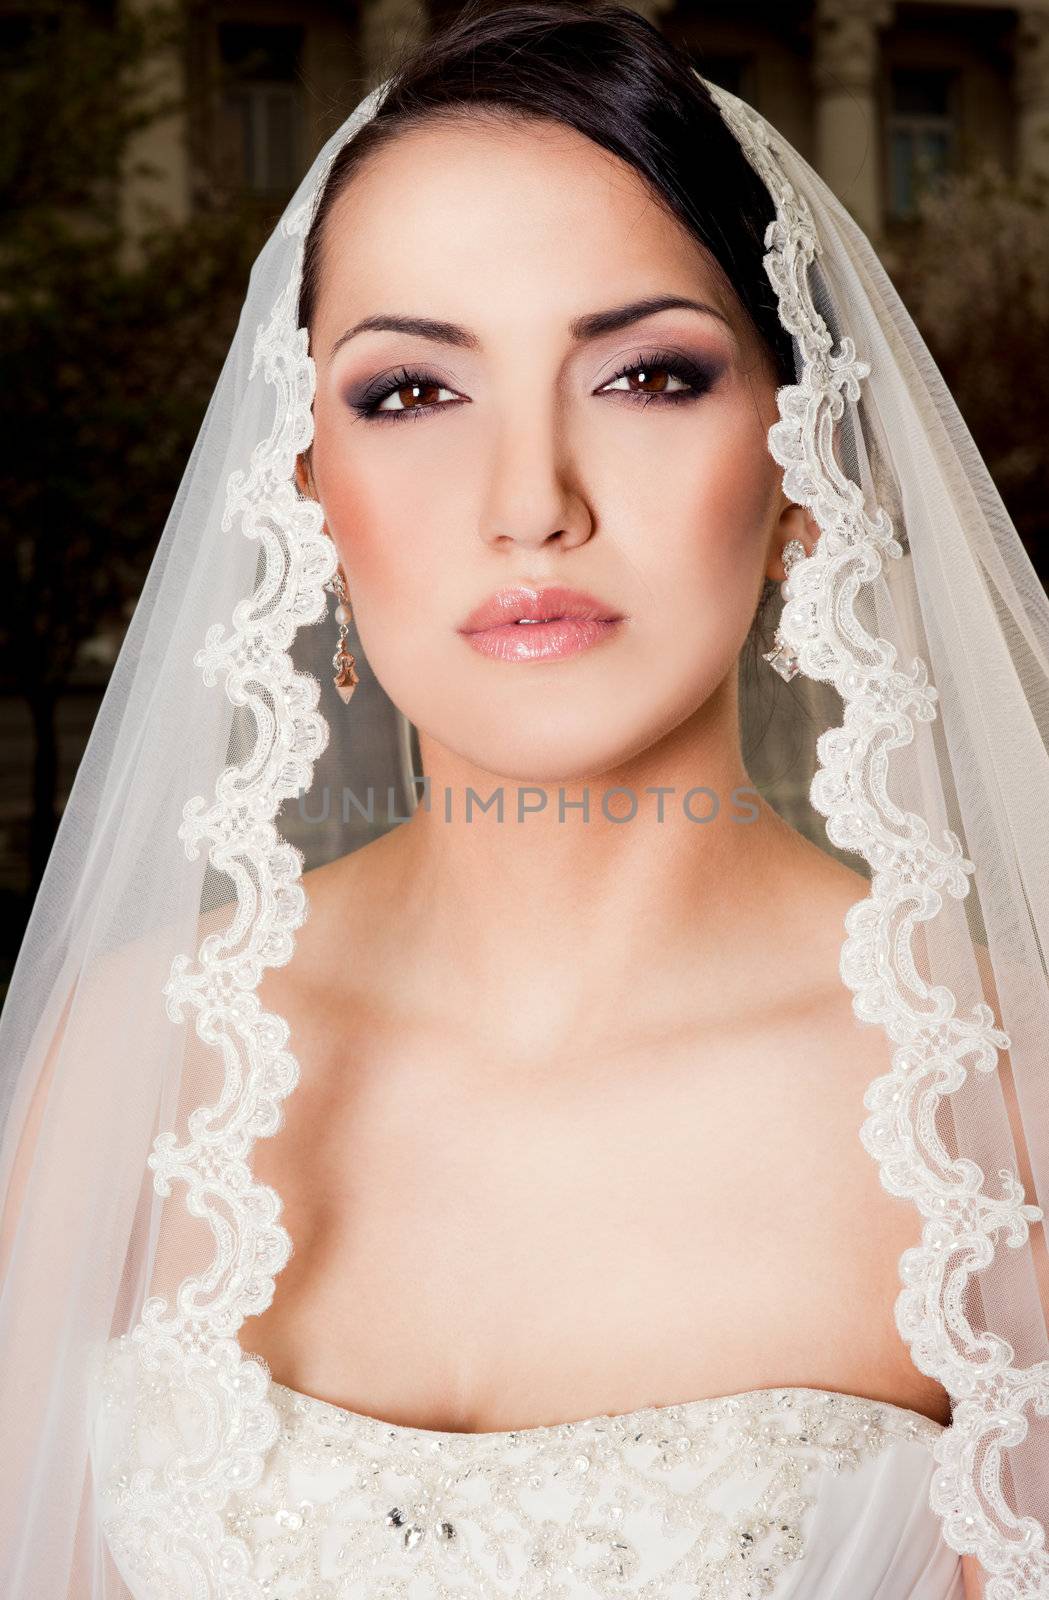 Portrait of beautiful bride with white veil over head on dark background